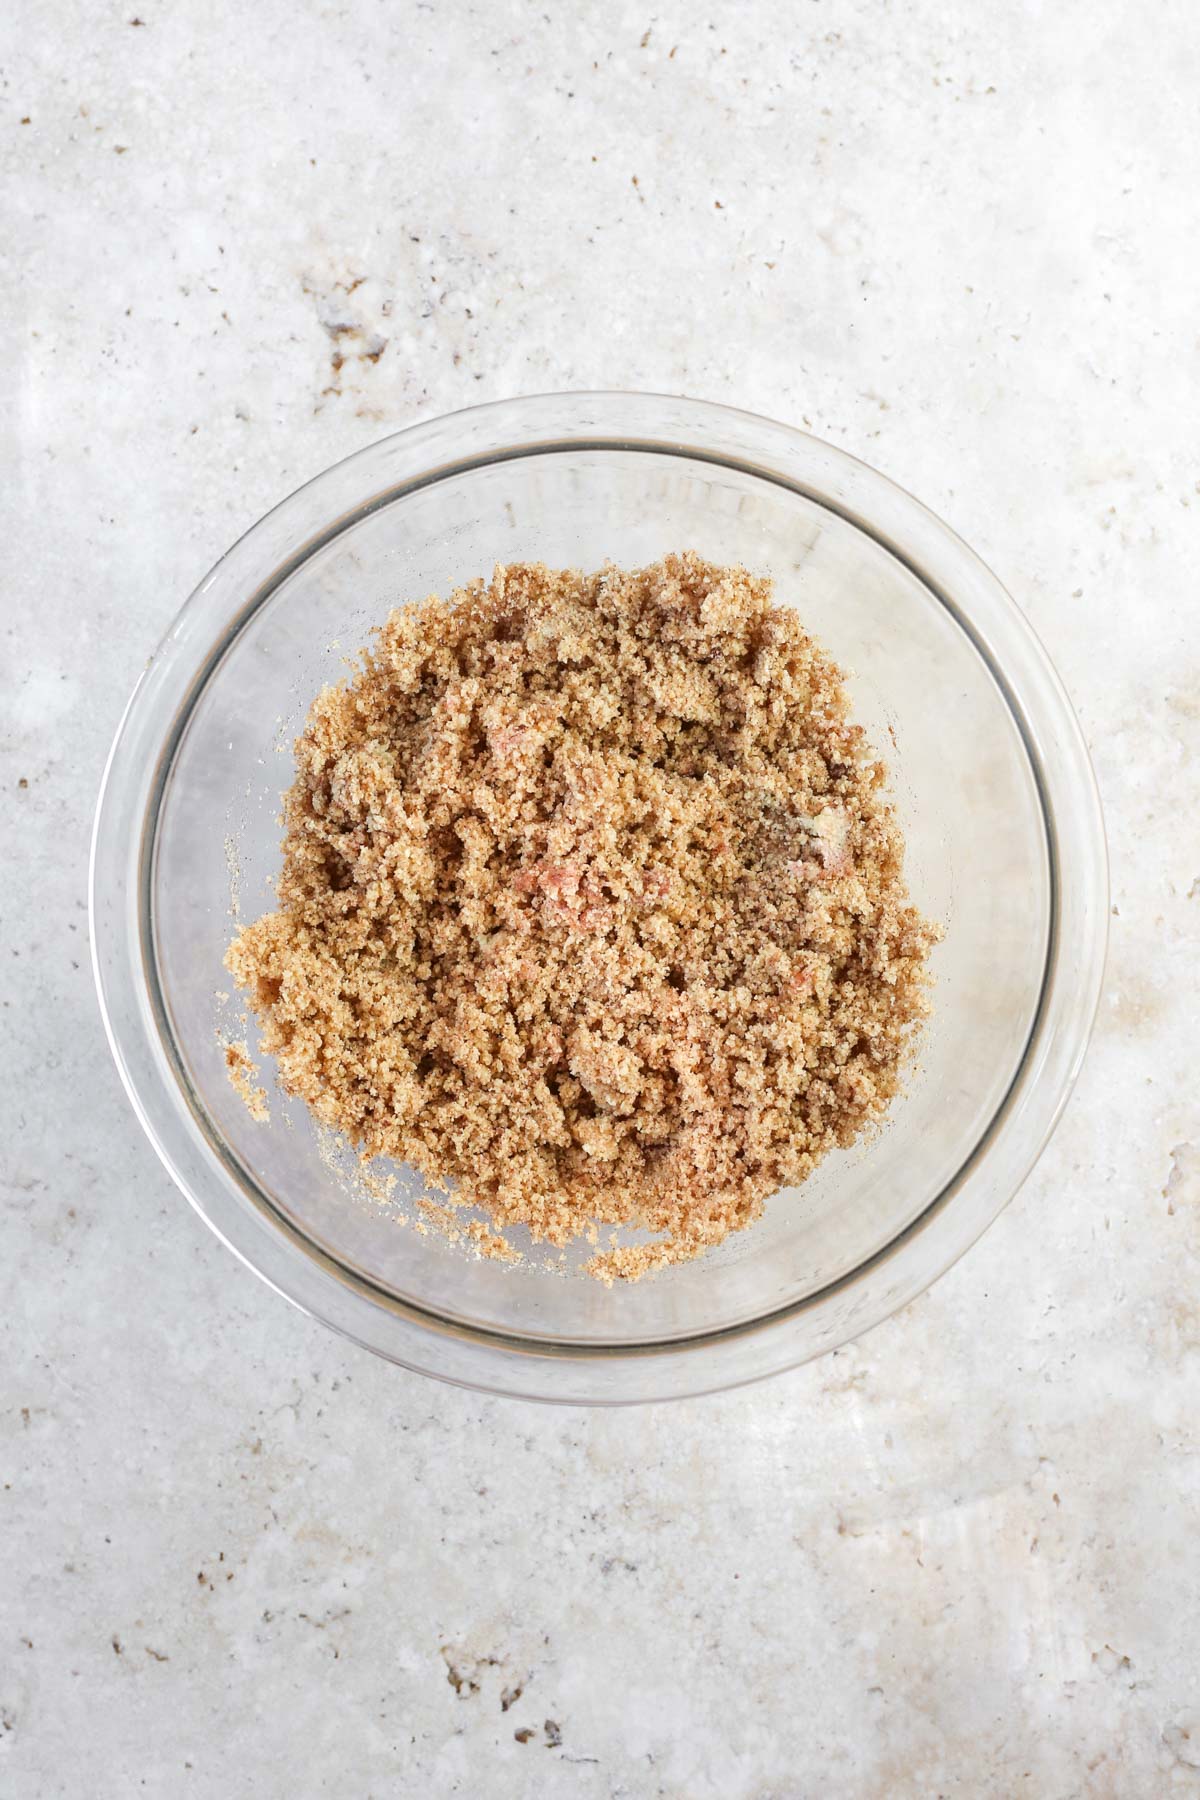 the mixed almond flour crumble topping in a bowl. It has a coarse texture.